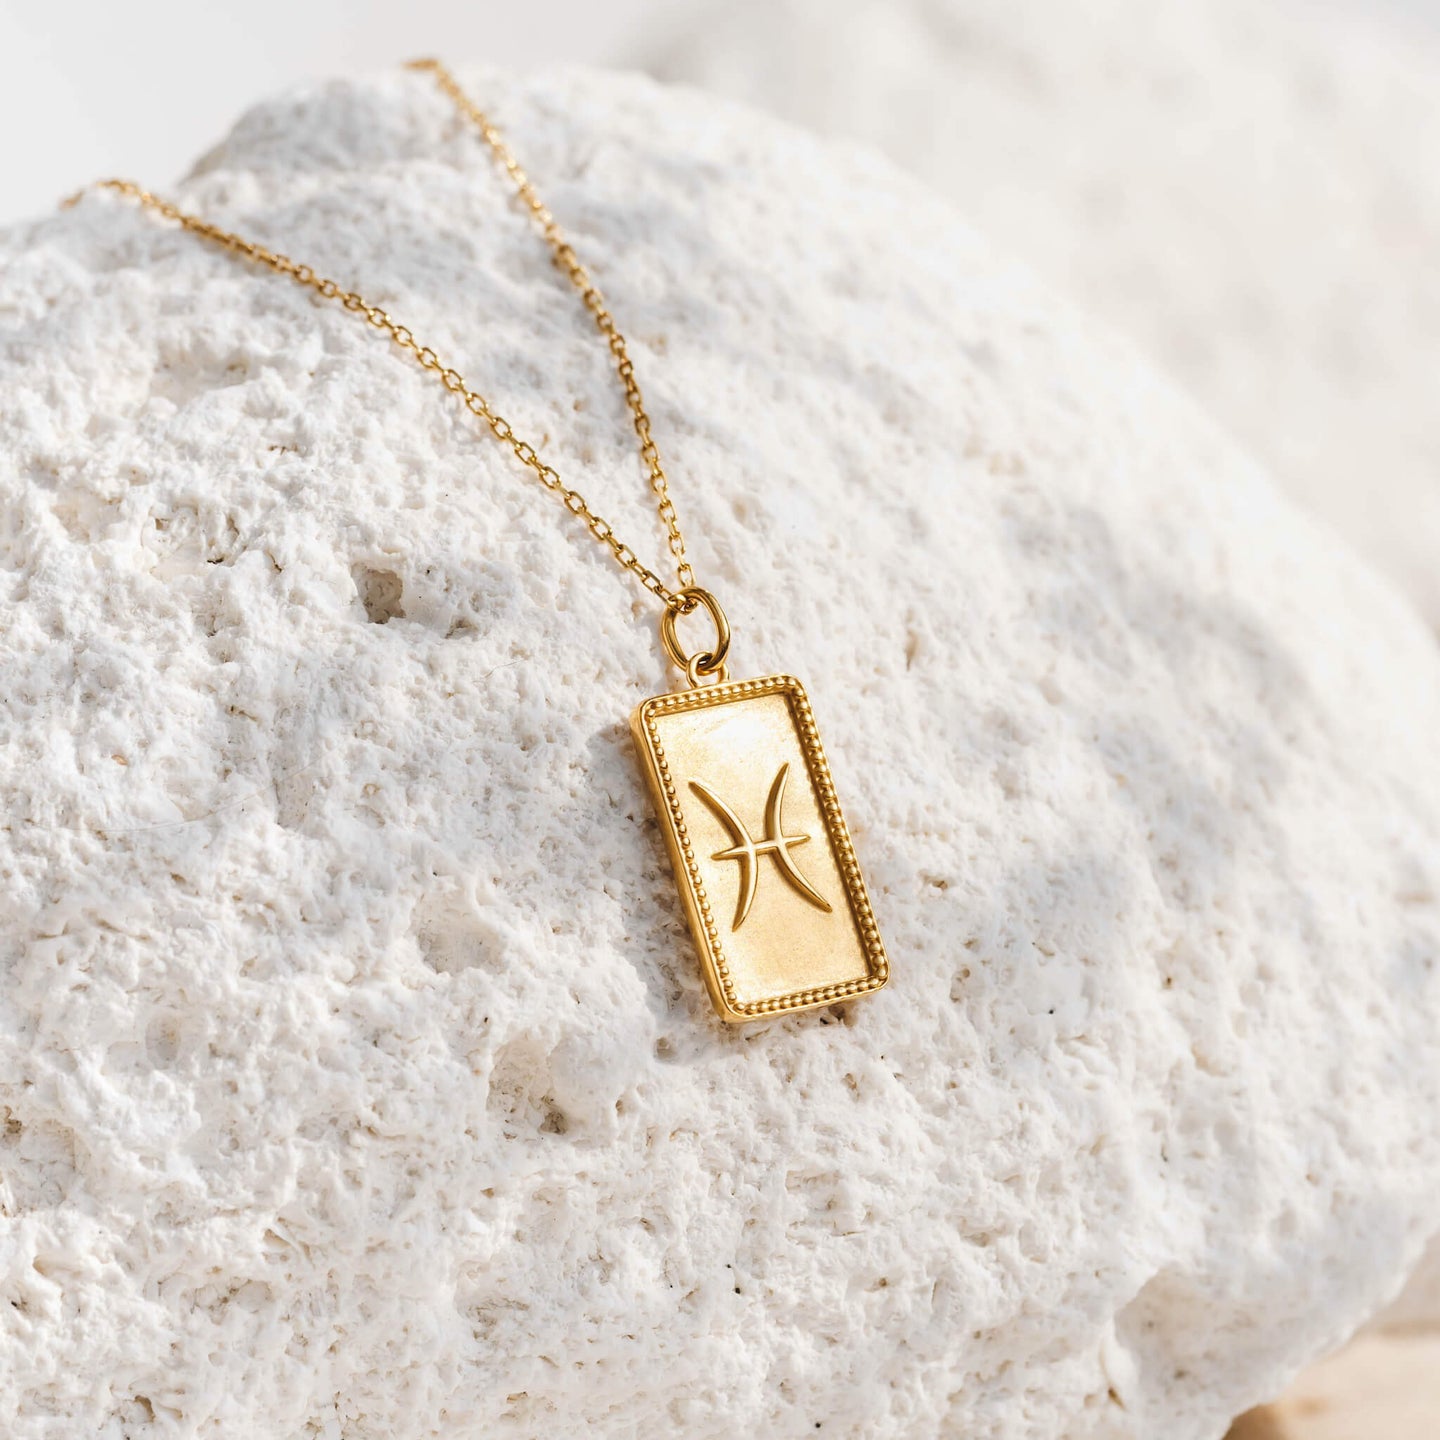 Pisces Necklace with Charm Pendant